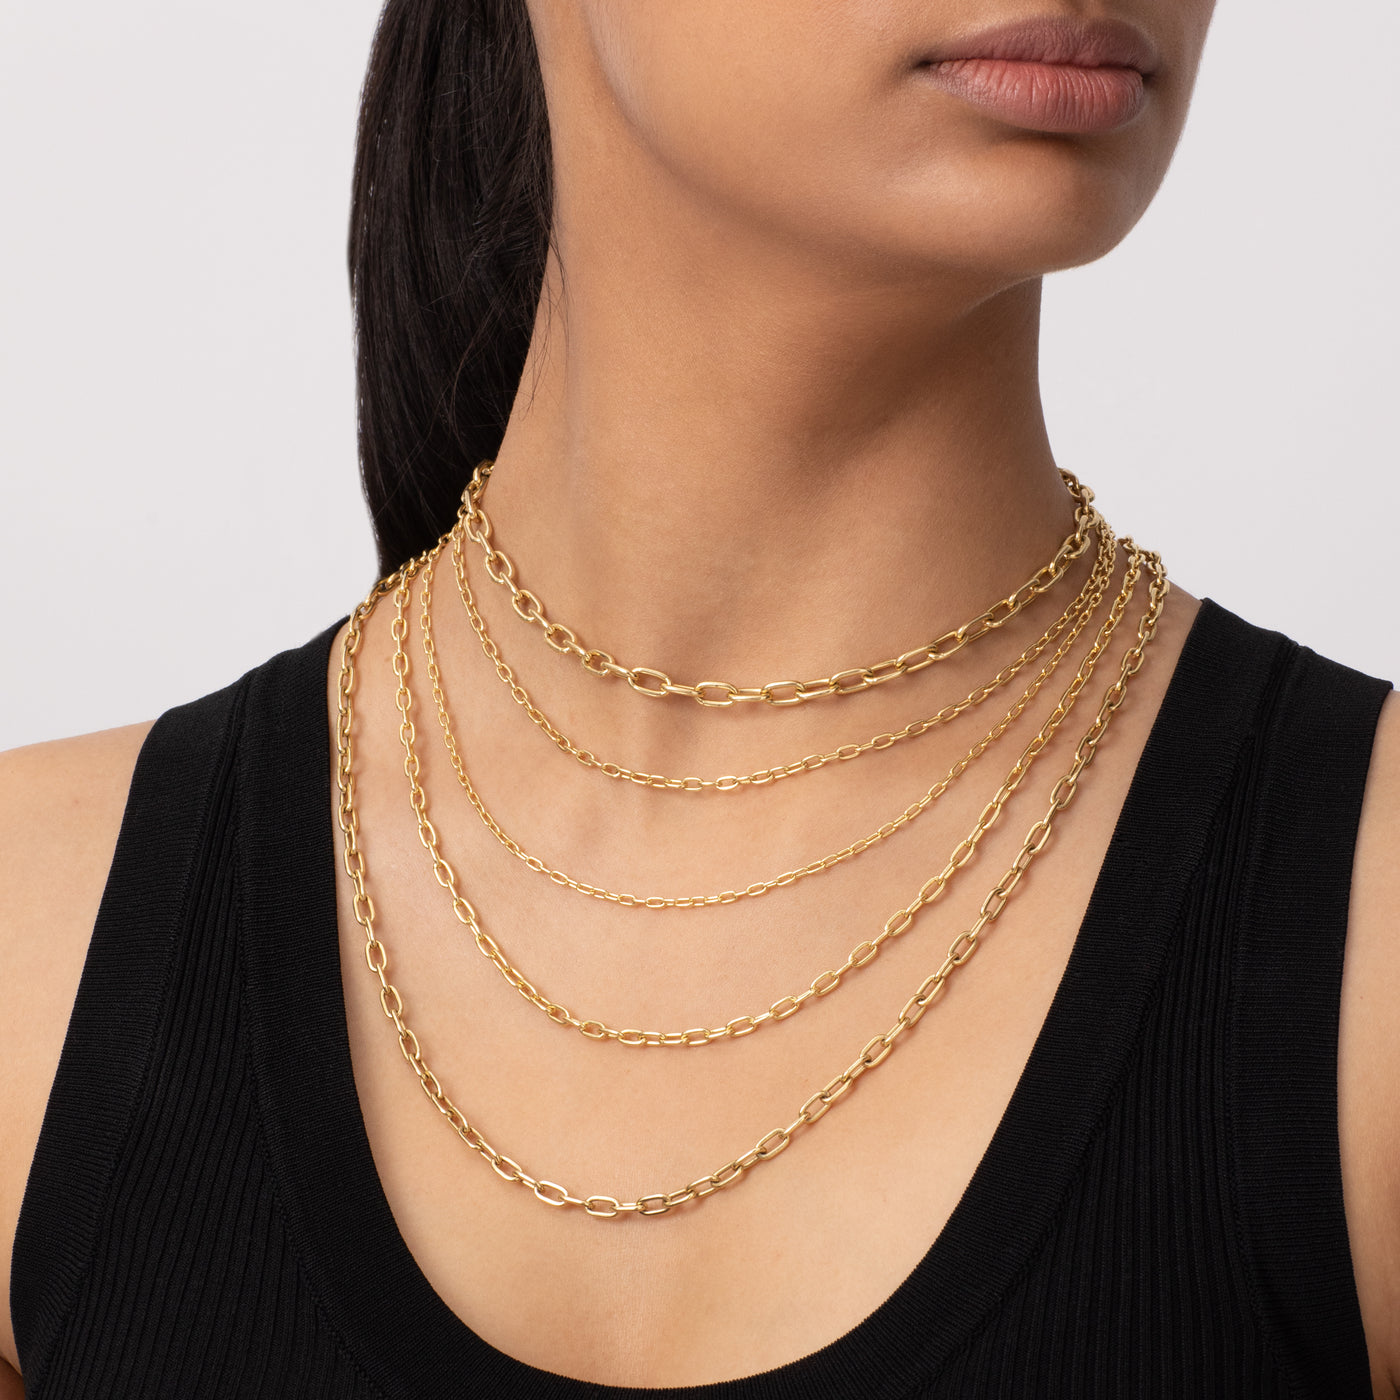 14K SOLID GOLD OVAL LINK CHAIN